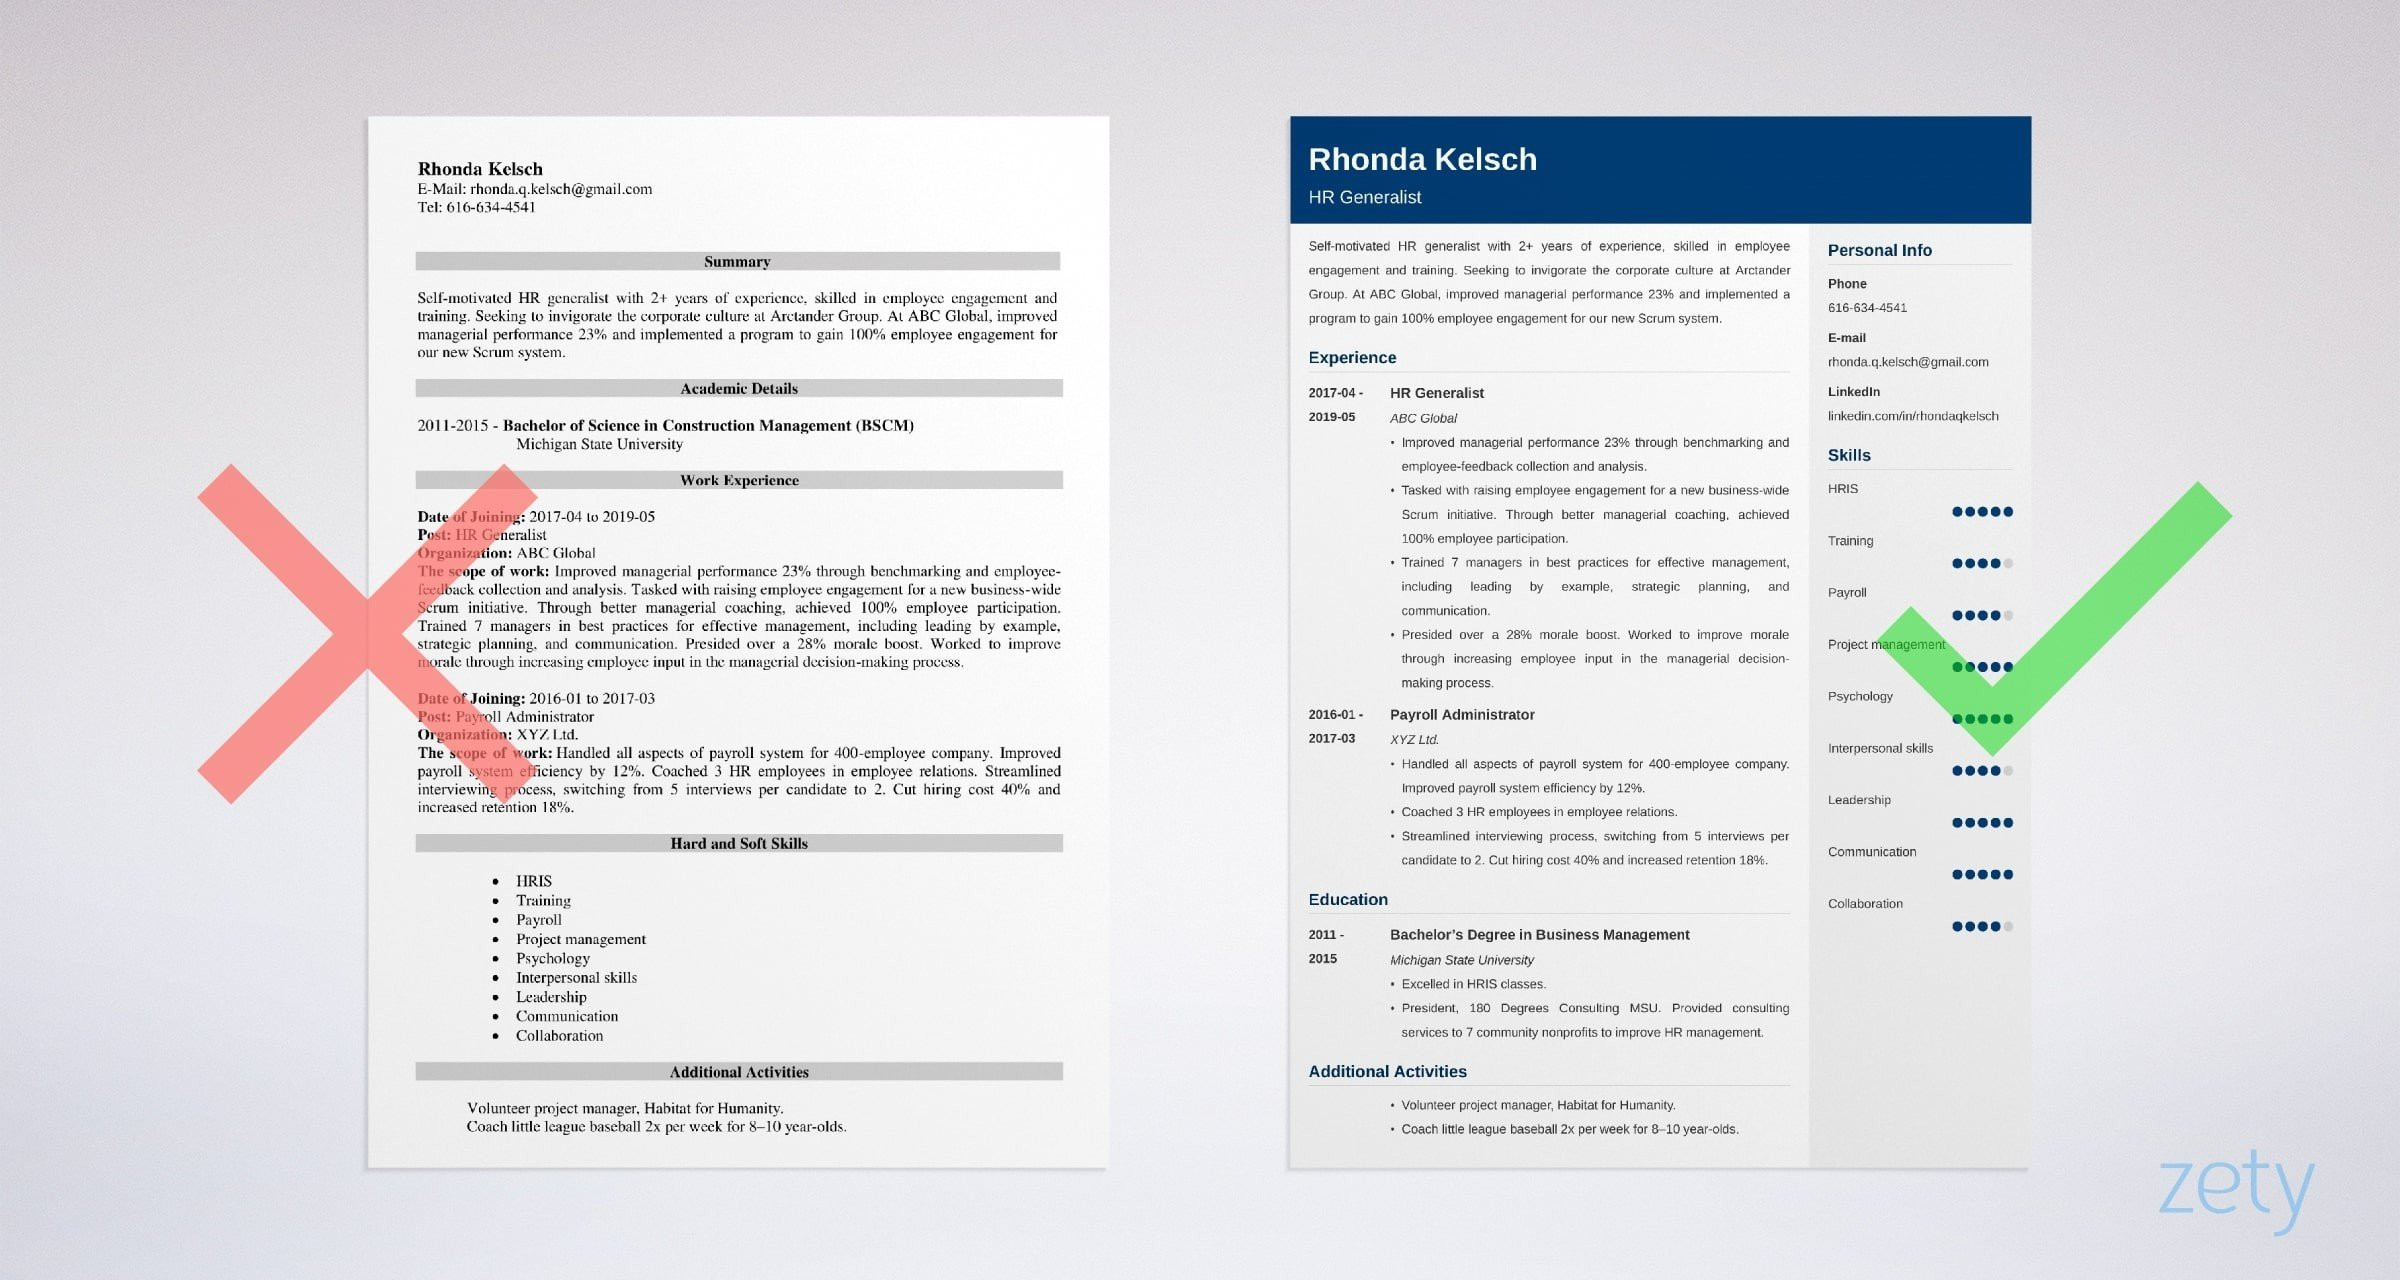 Resume Headline Samples for Human Resources Human Resources (hr) Generalist Resume Samples [20 Tips]